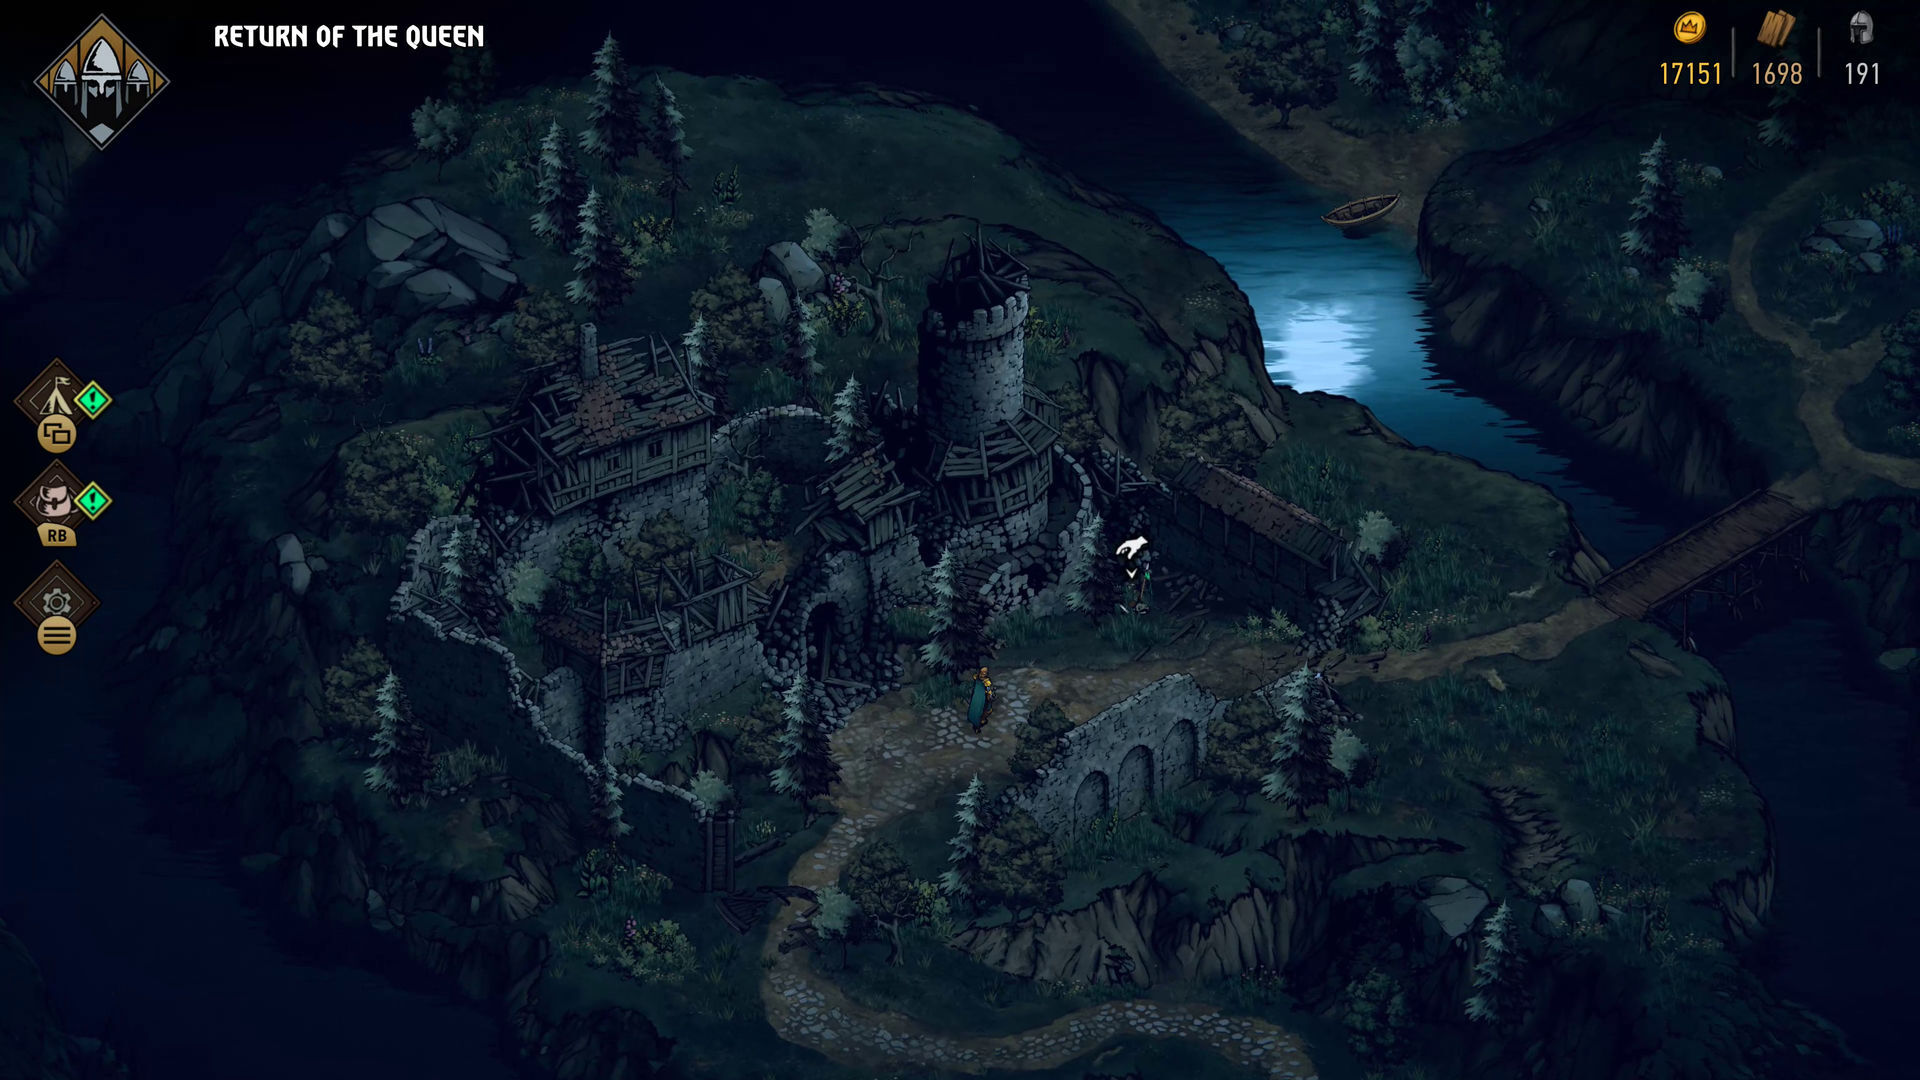 thronebreaker witcher tales review ps4 projekt cd red meve hail queen overed dialogues localized languages fully voice into gog